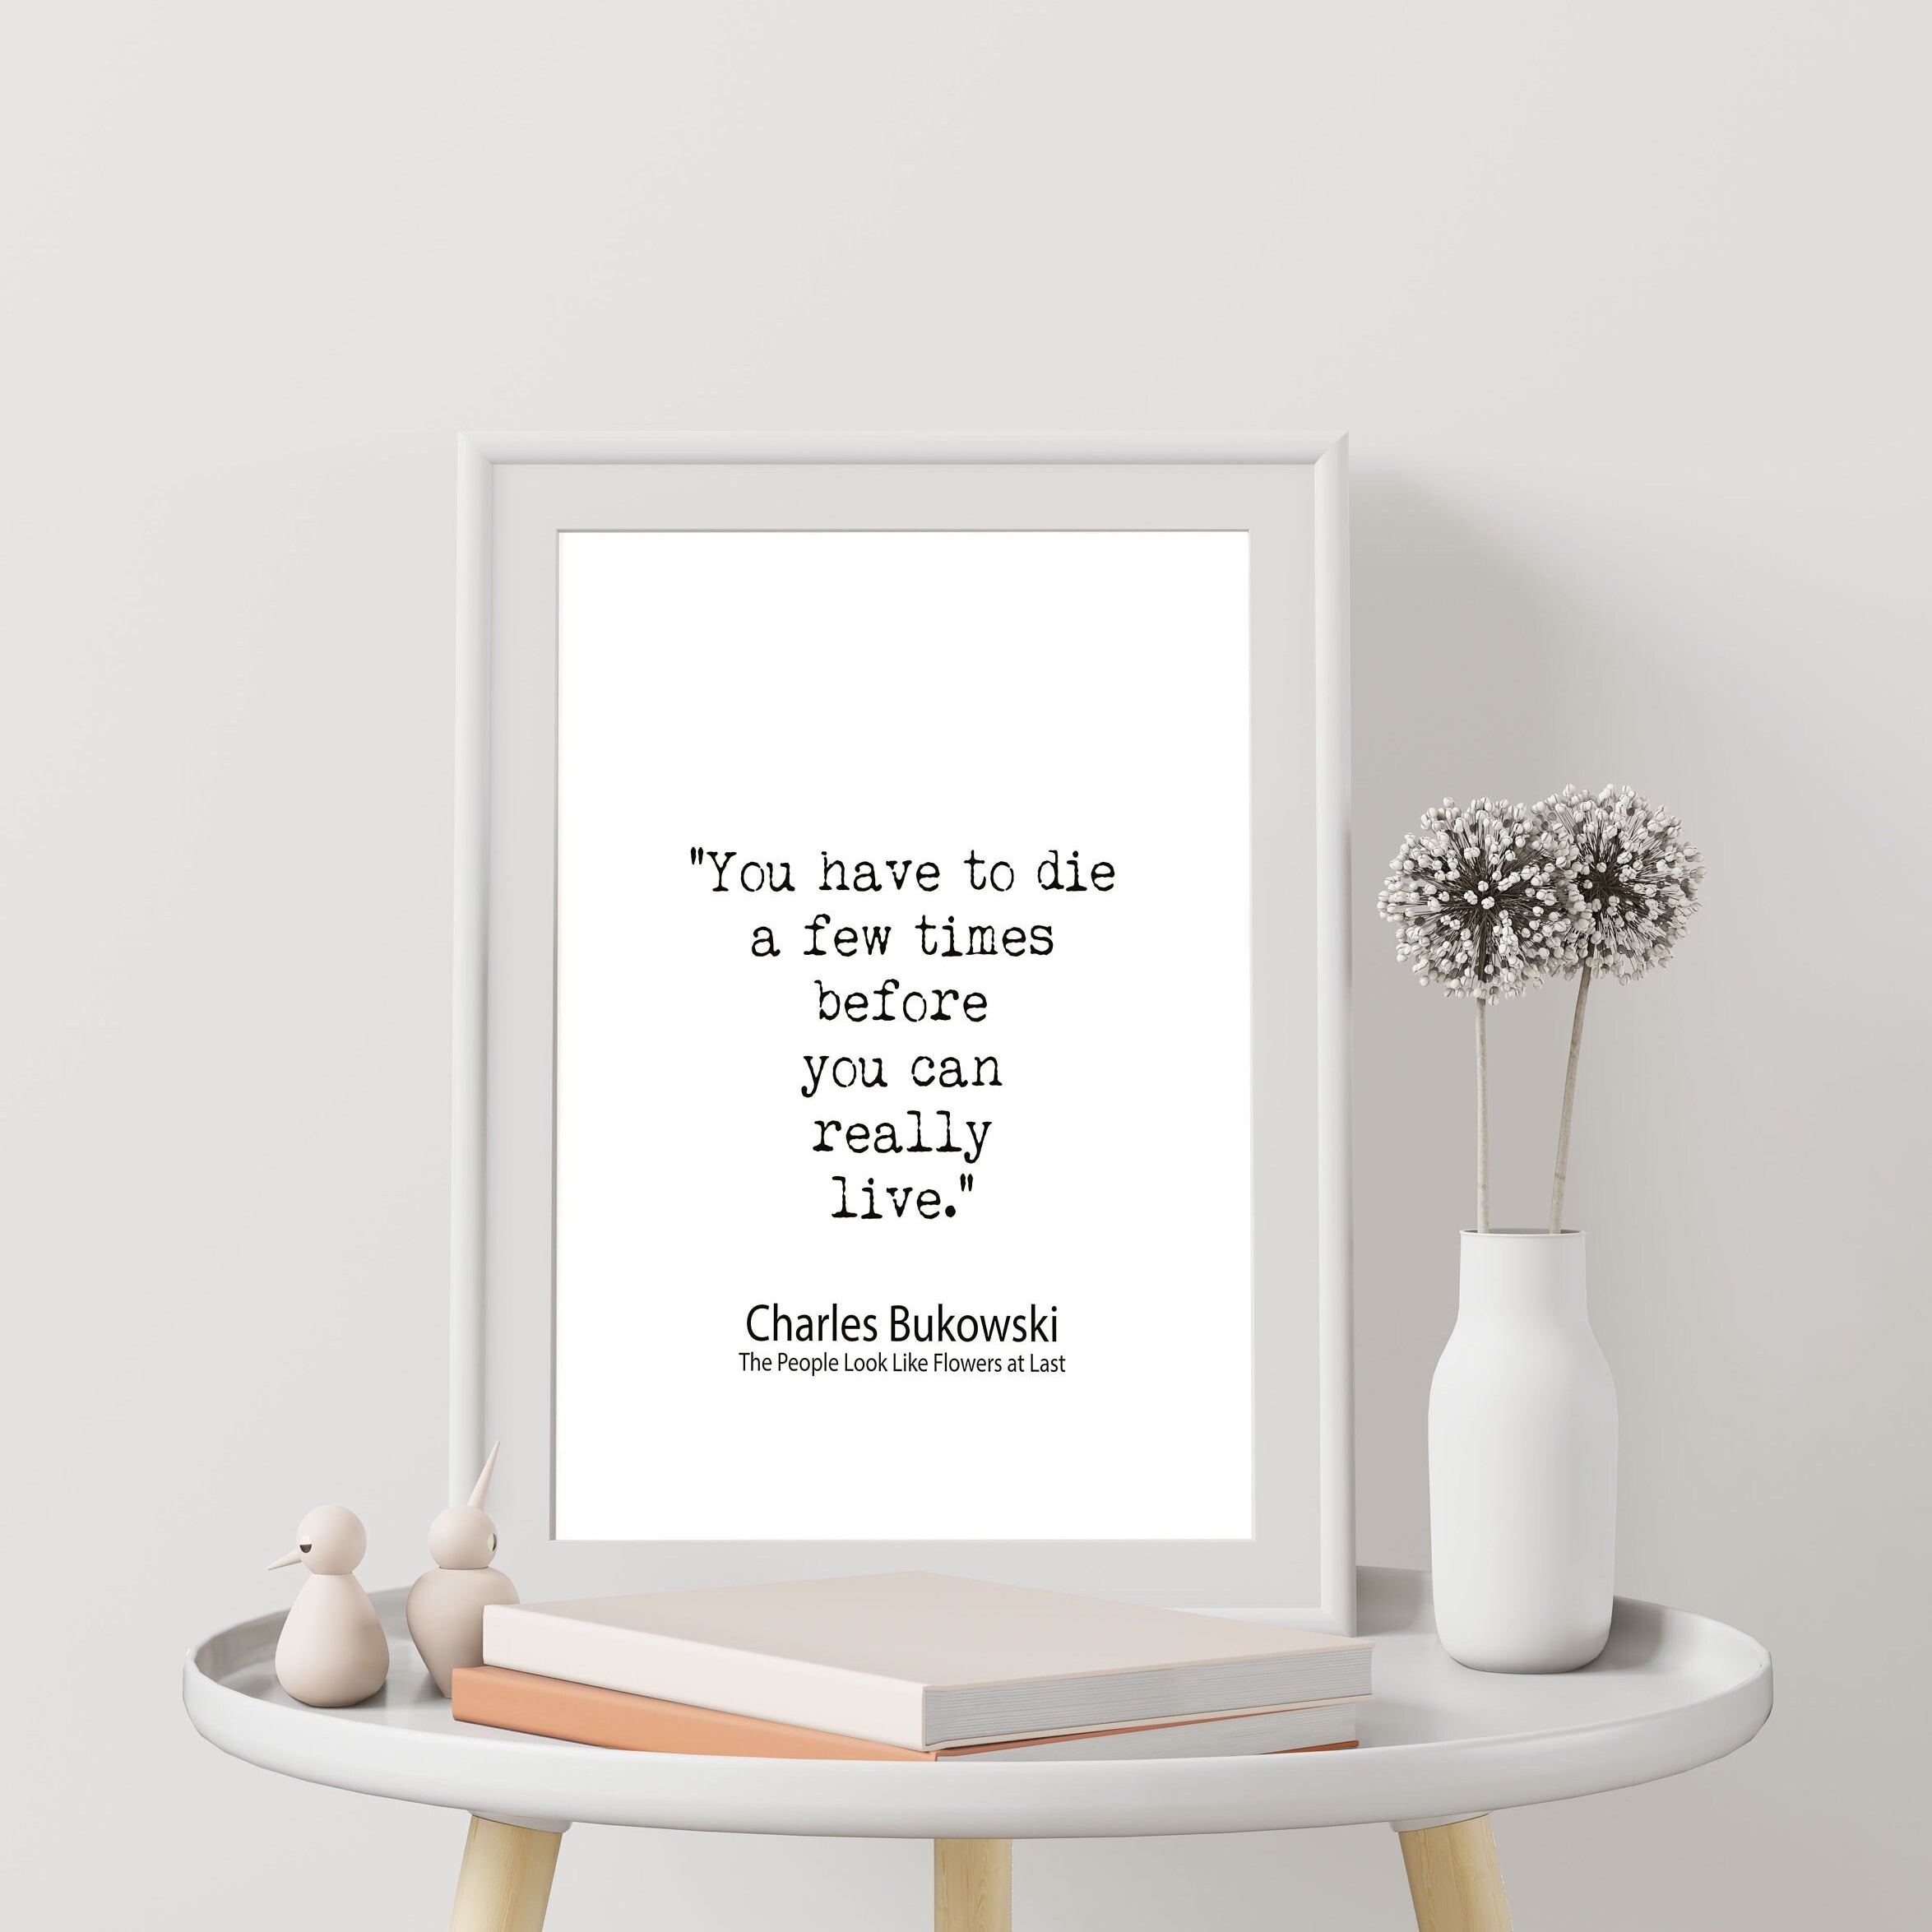 Charles Bukowski Quote Print, Minimalist Black & White Poster Art Print - "You Have To Die A Few Times Before You Can Really Live"